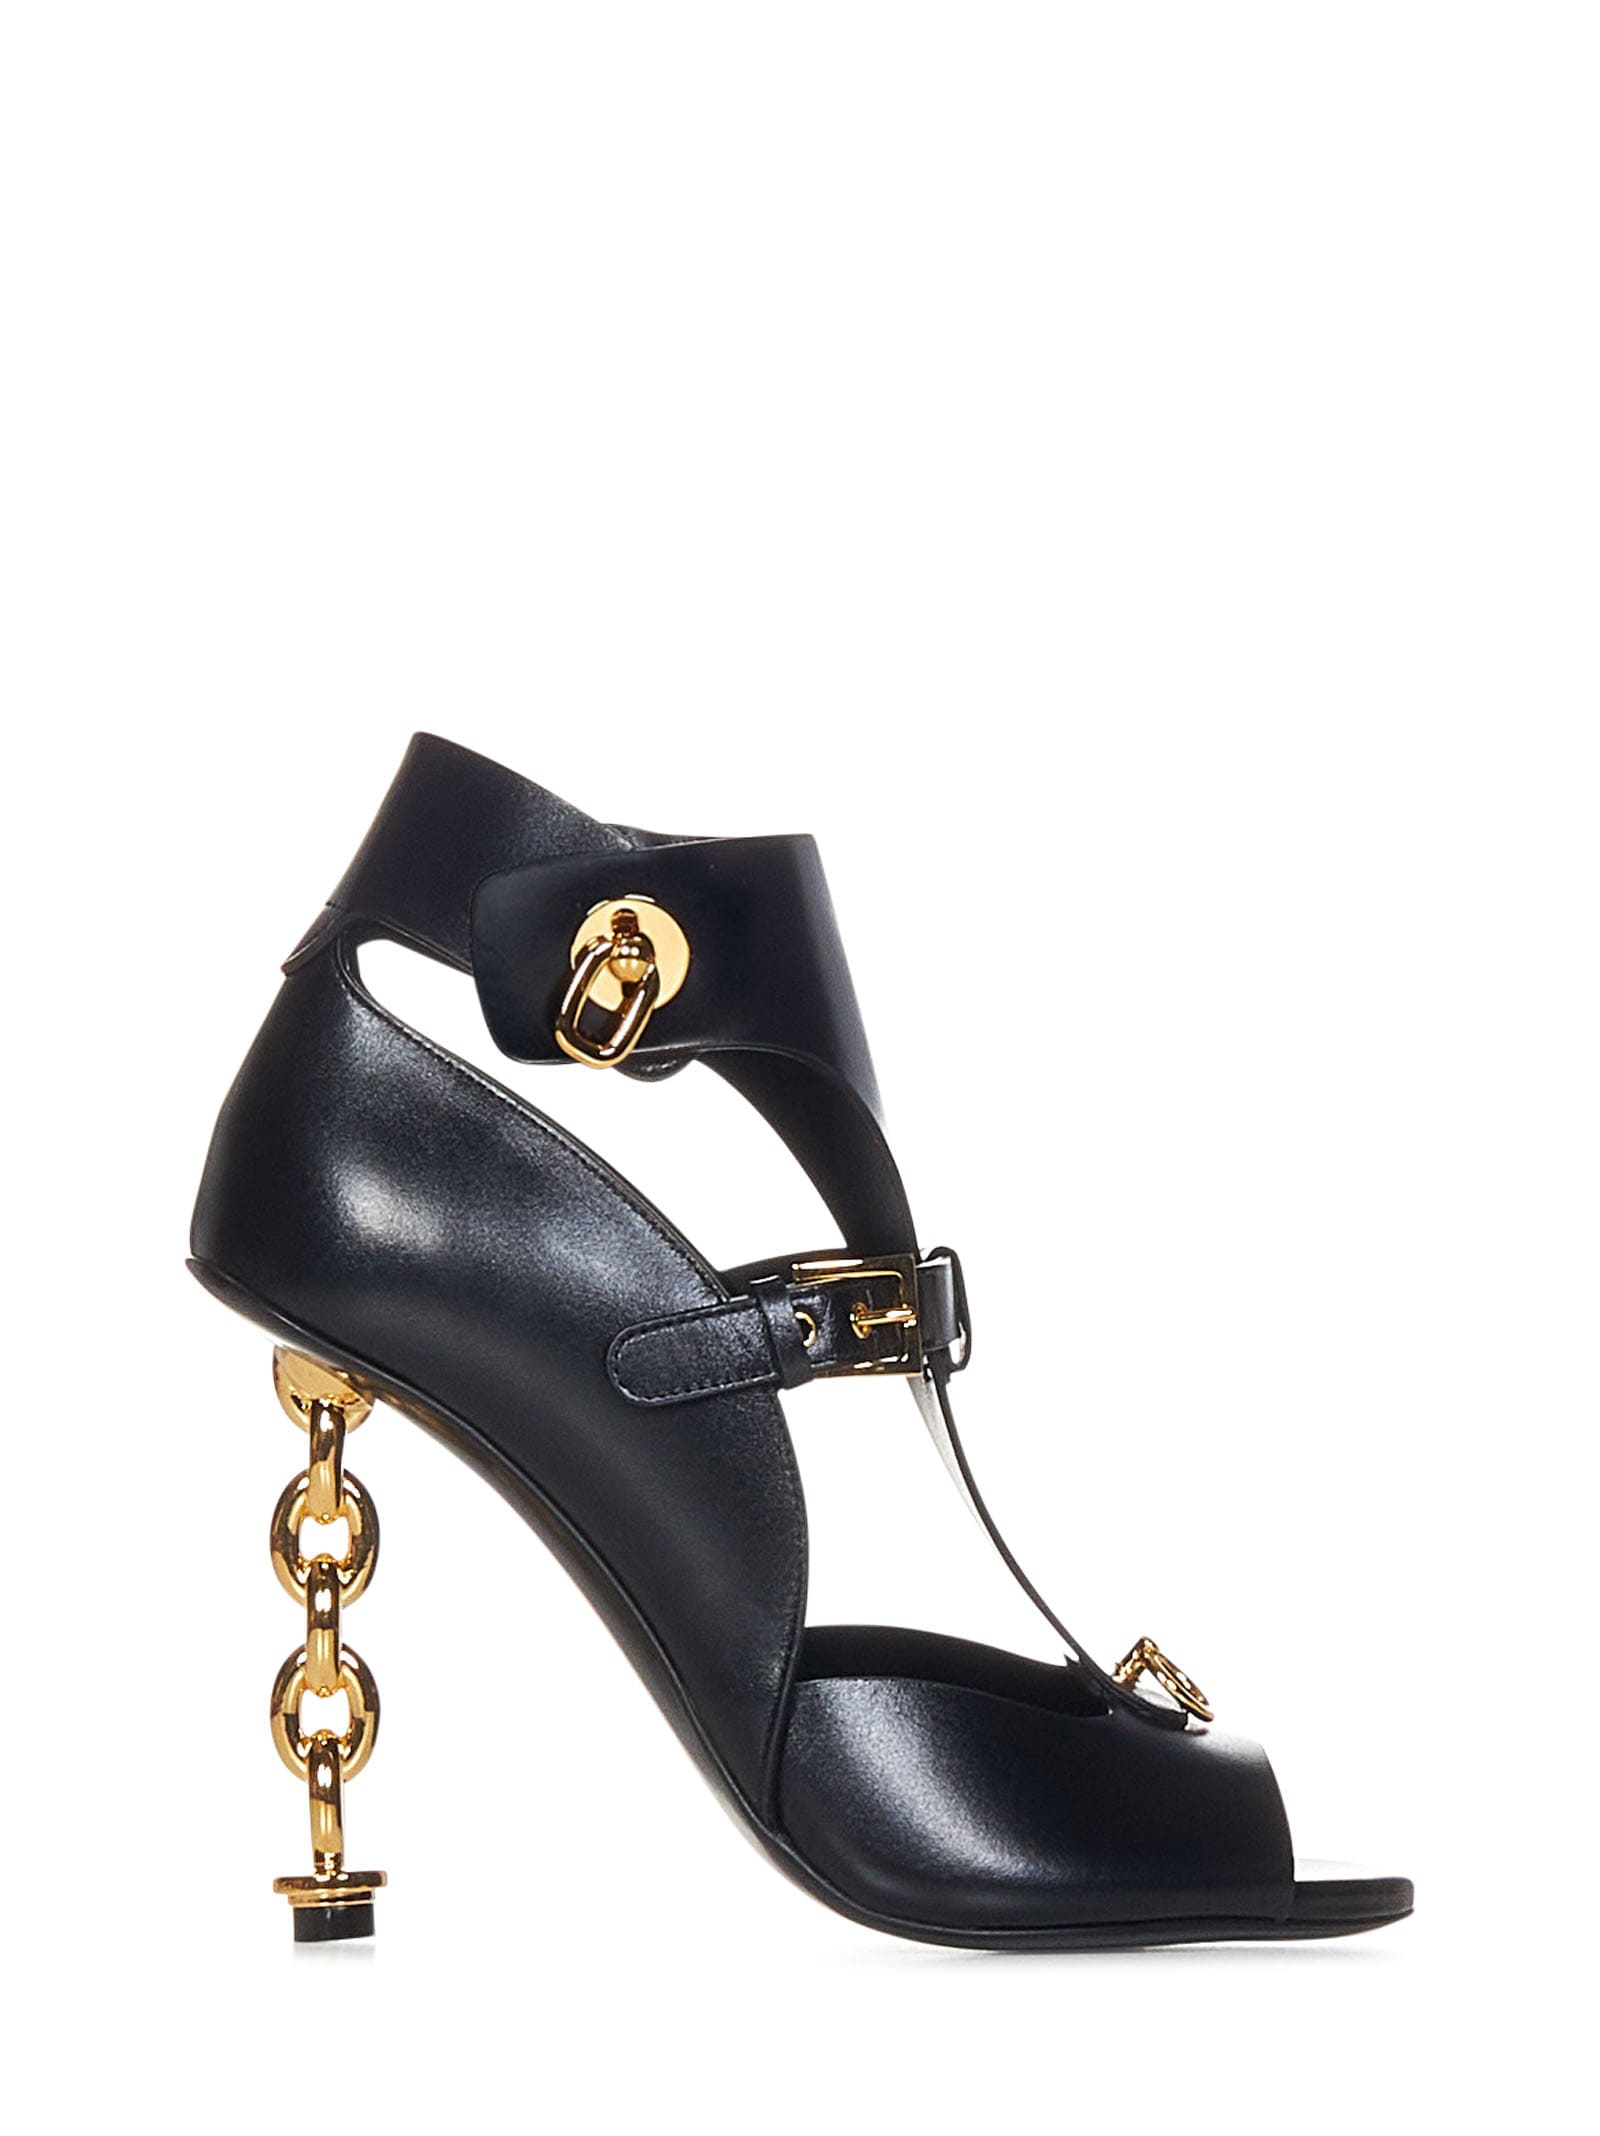 Tom Ford Chain Heel Sandals